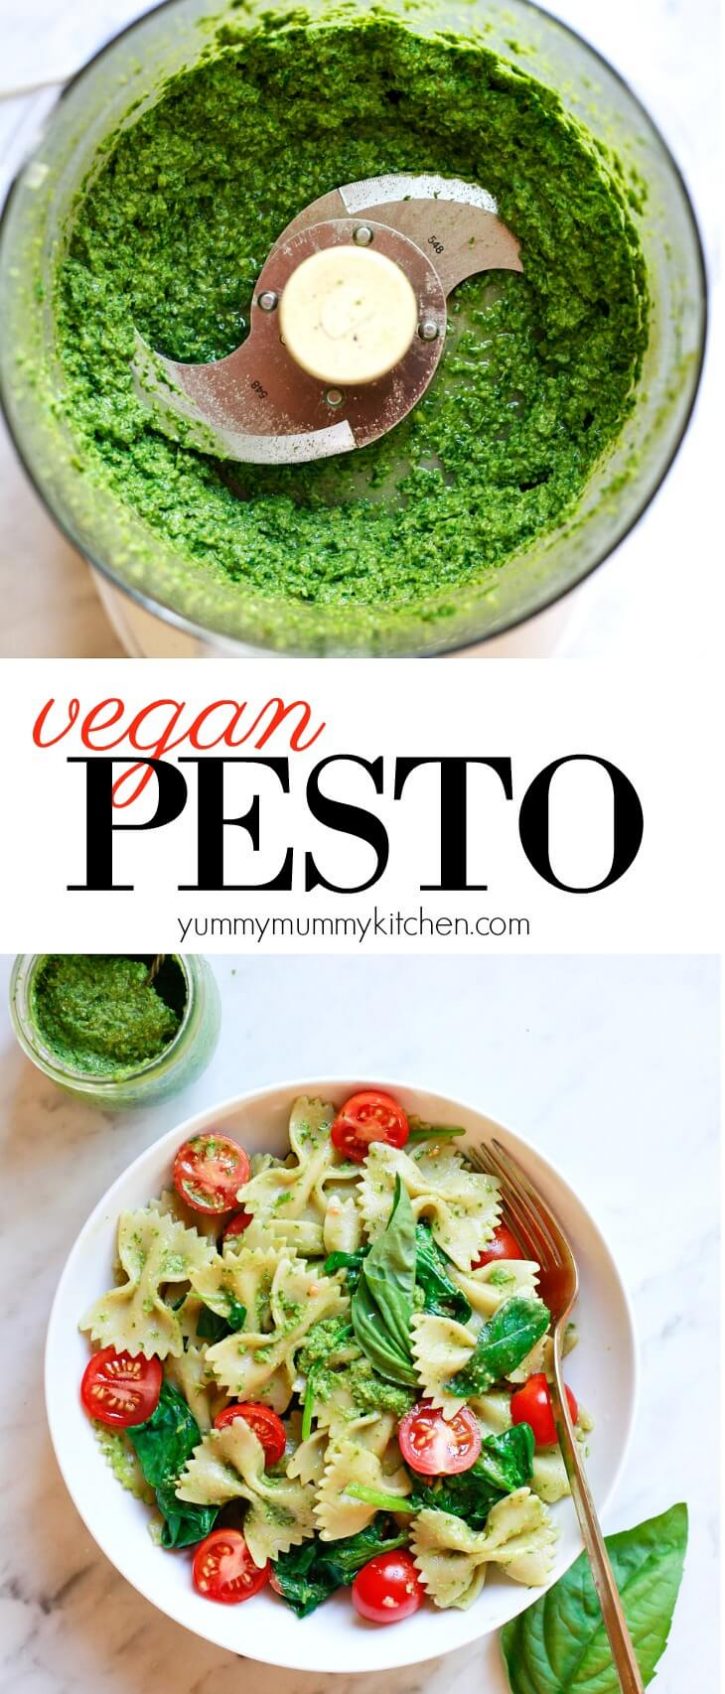  A food processor is filled with bright green fresh basil pesto and a white bowl is filled with pesto pasta with spinach and cherry tomatoes. How to make the best easy vegan pesto with fresh basil. This vegan pesto recipe is perfect for vegan pesto pasta, pizza, and more.